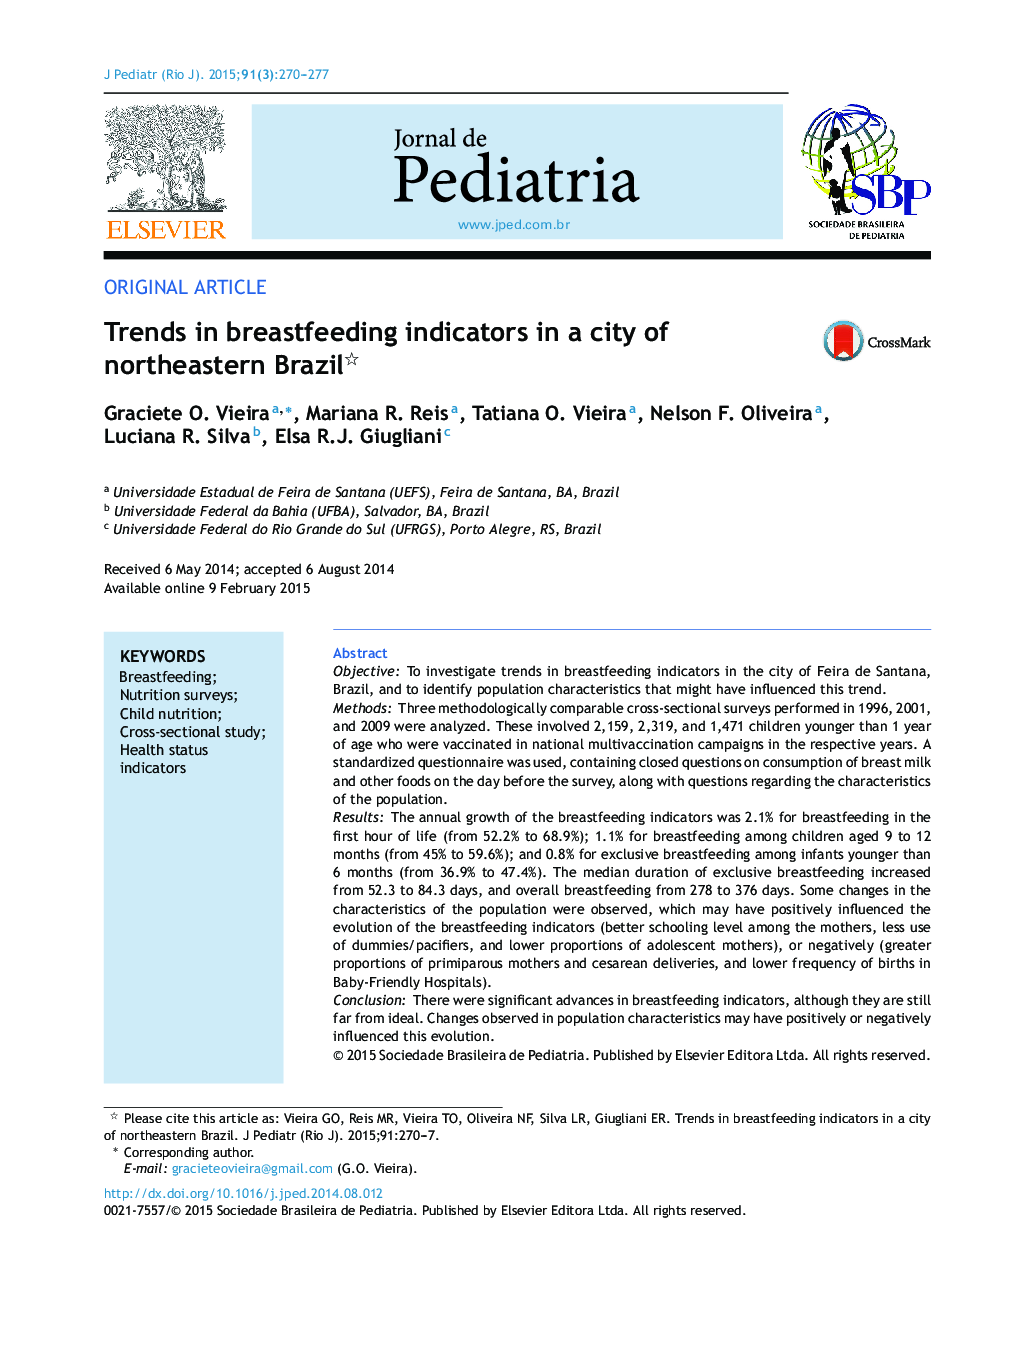 Trends in breastfeeding indicators in a city of northeastern Brazil 